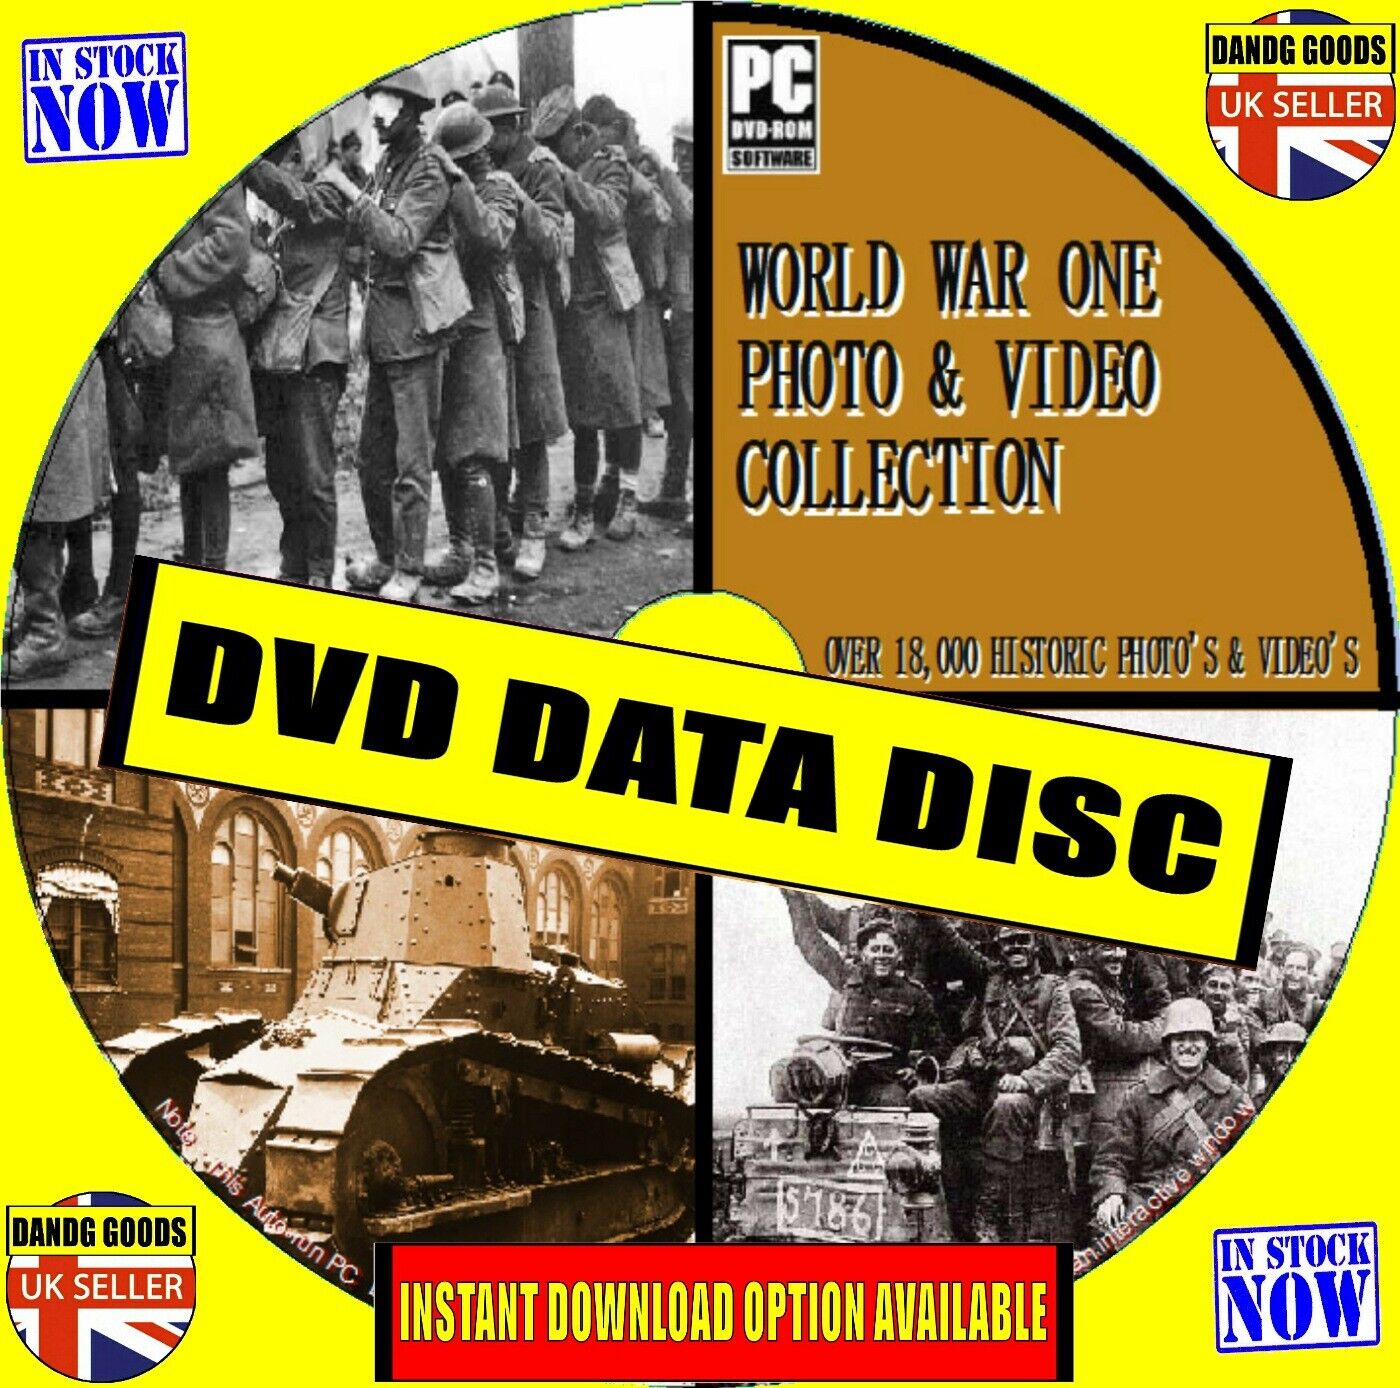 18000 HISTORIC 1st WORLD WAR PHOTOS/VIDEOS WW1 TANKS PLANES SUBS SHIPS ARMS DVD 